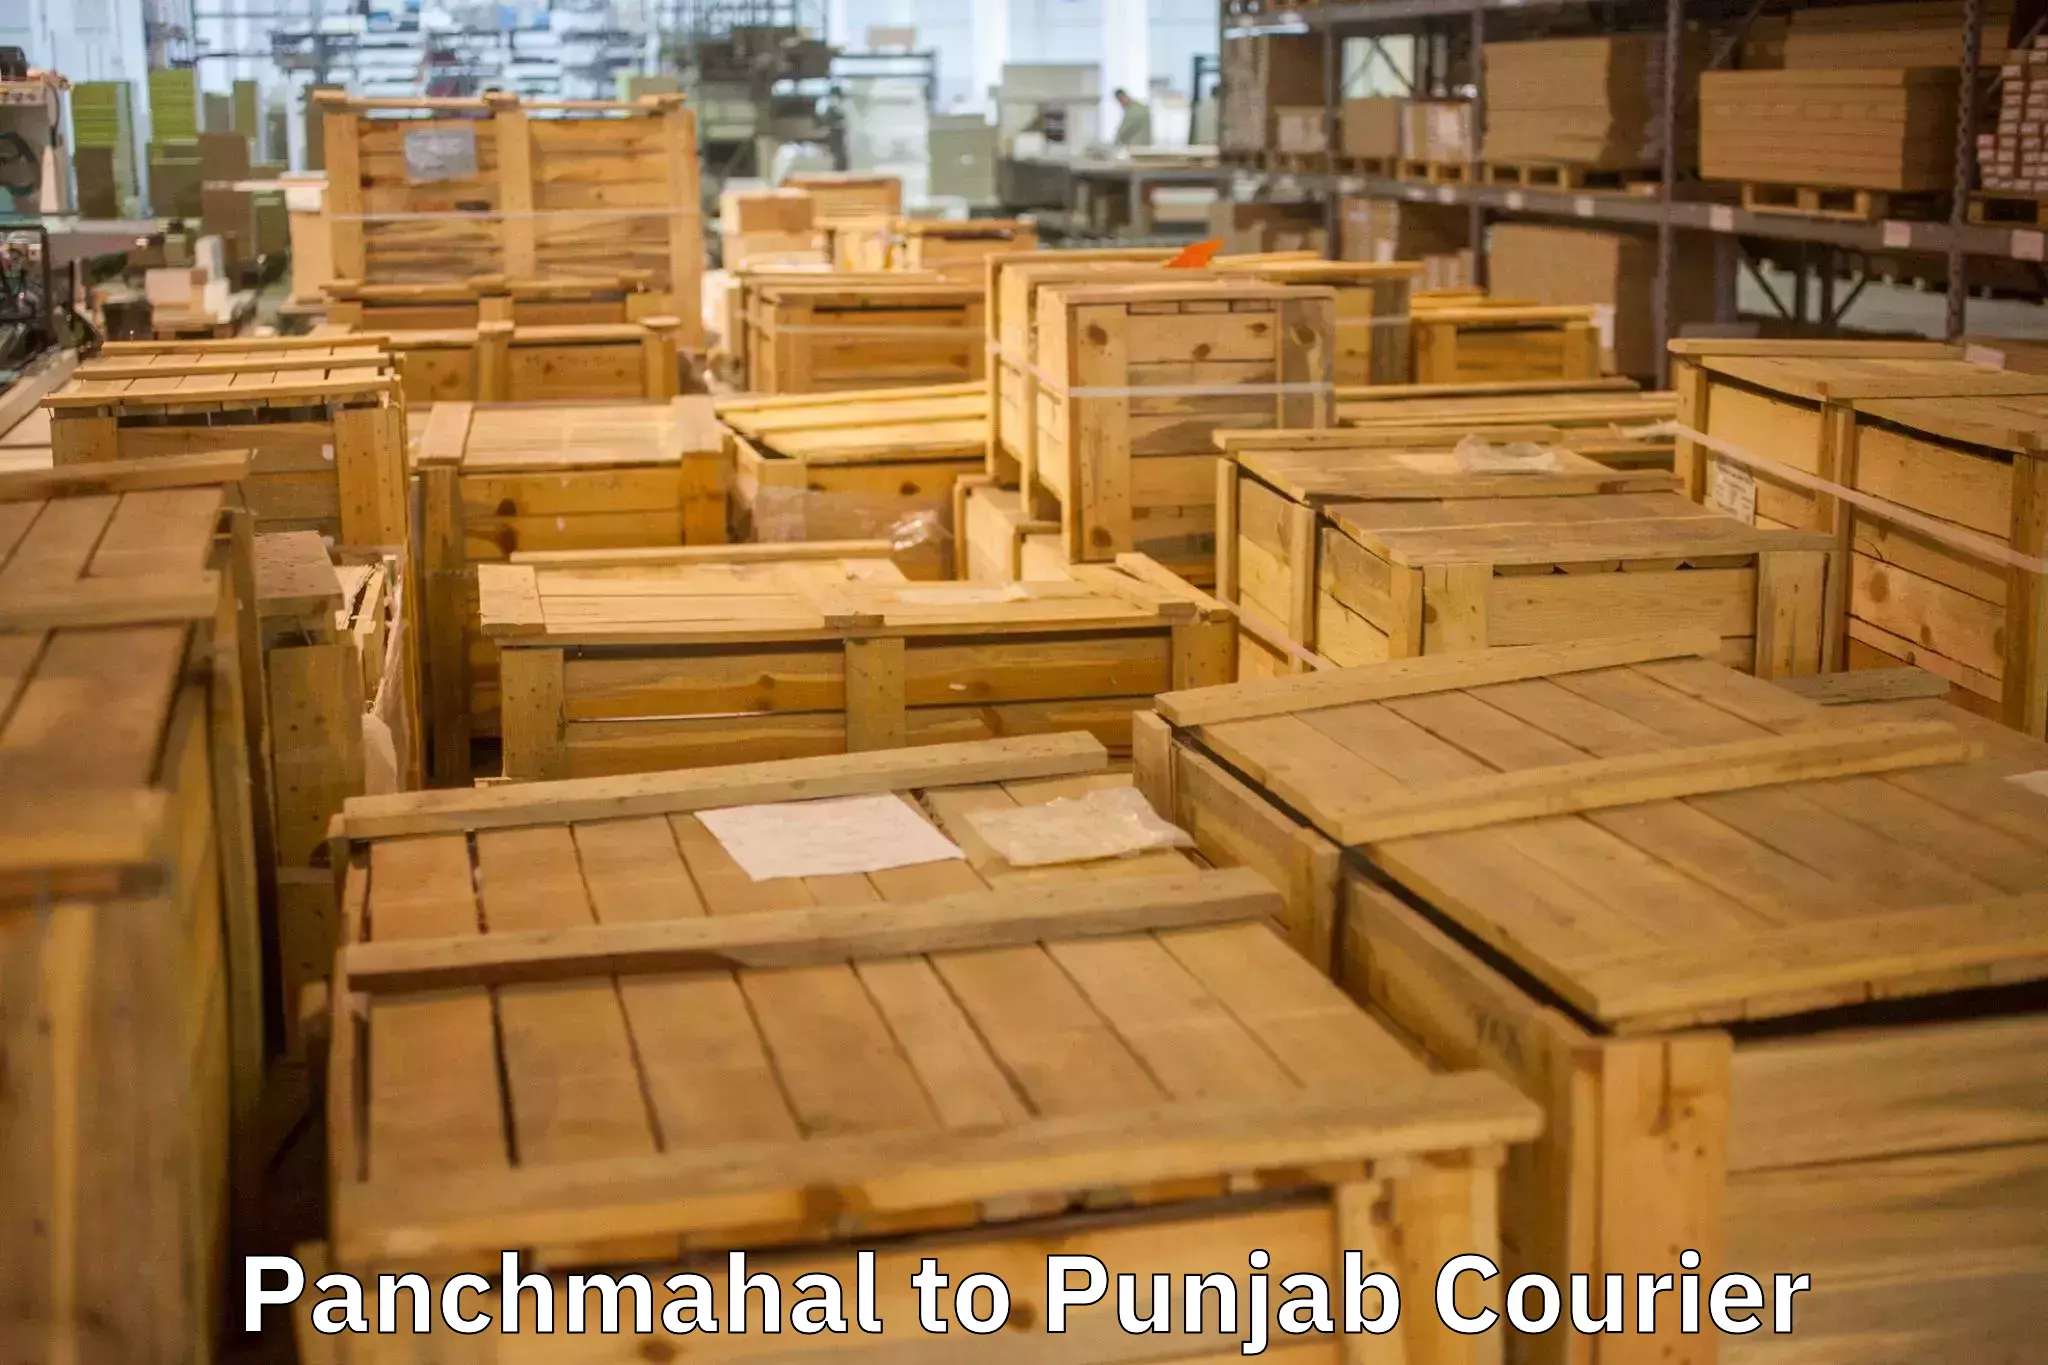 Trusted moving company Panchmahal to Amritsar